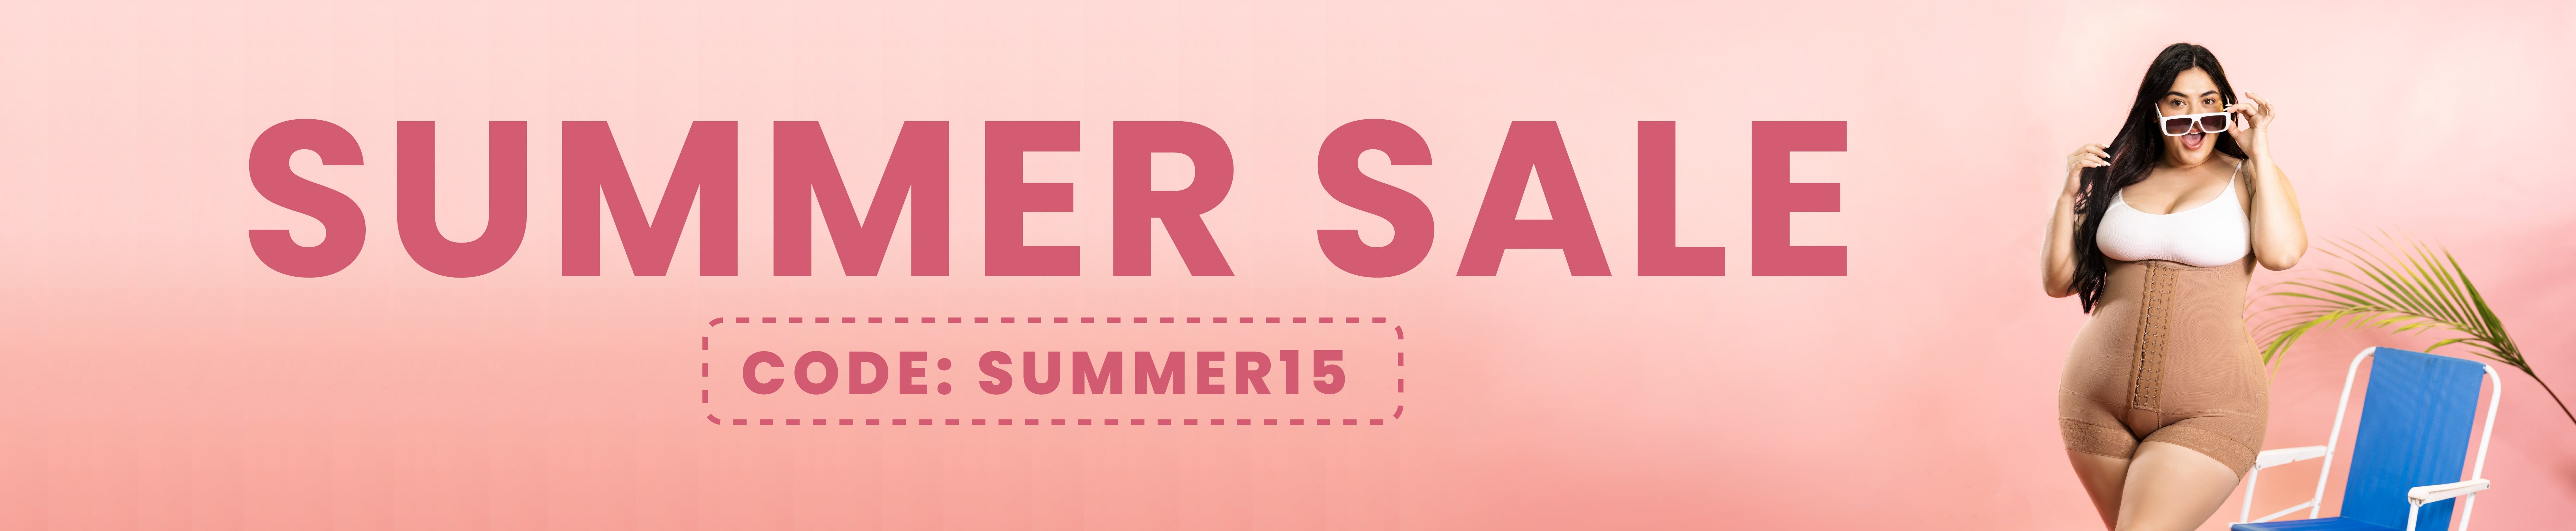 SUMMER SALE - SAVE $15 on Orders Over $60! - CODE: SUMMER15